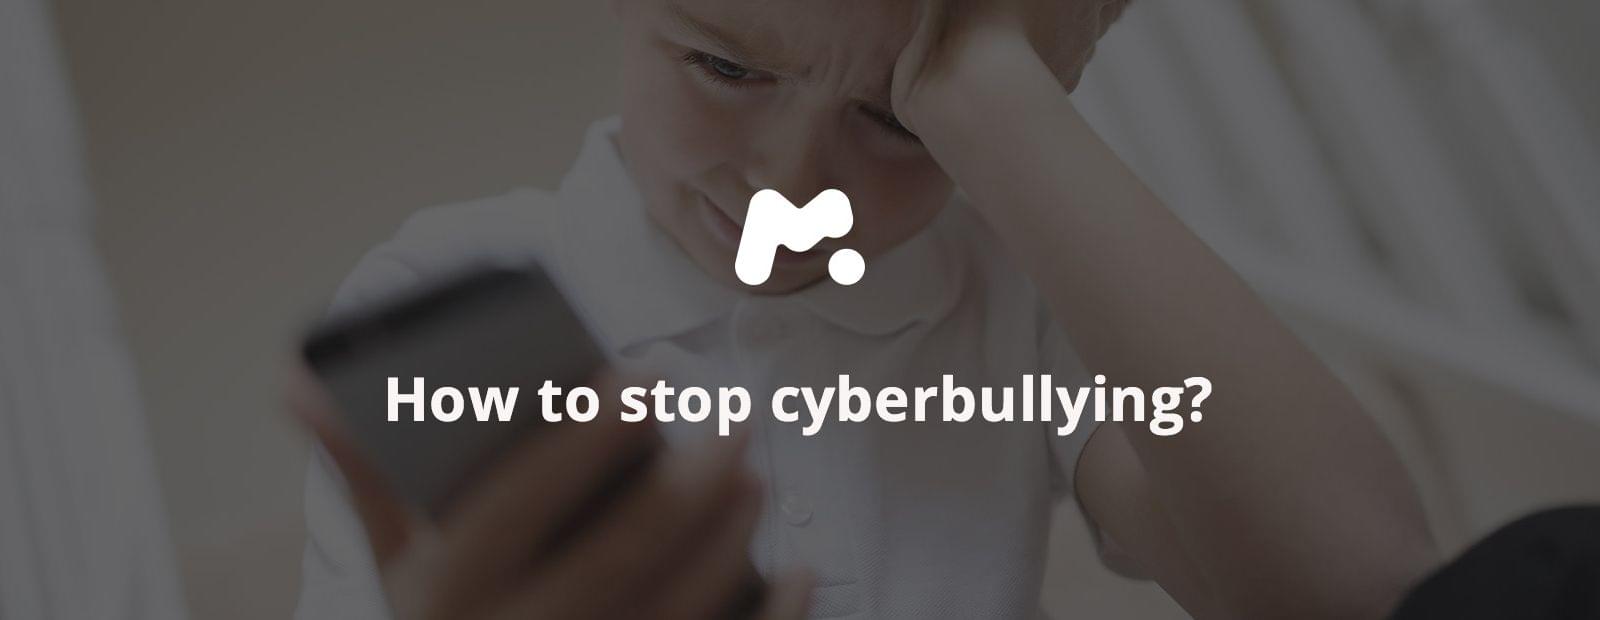 How to stop cyberbullying